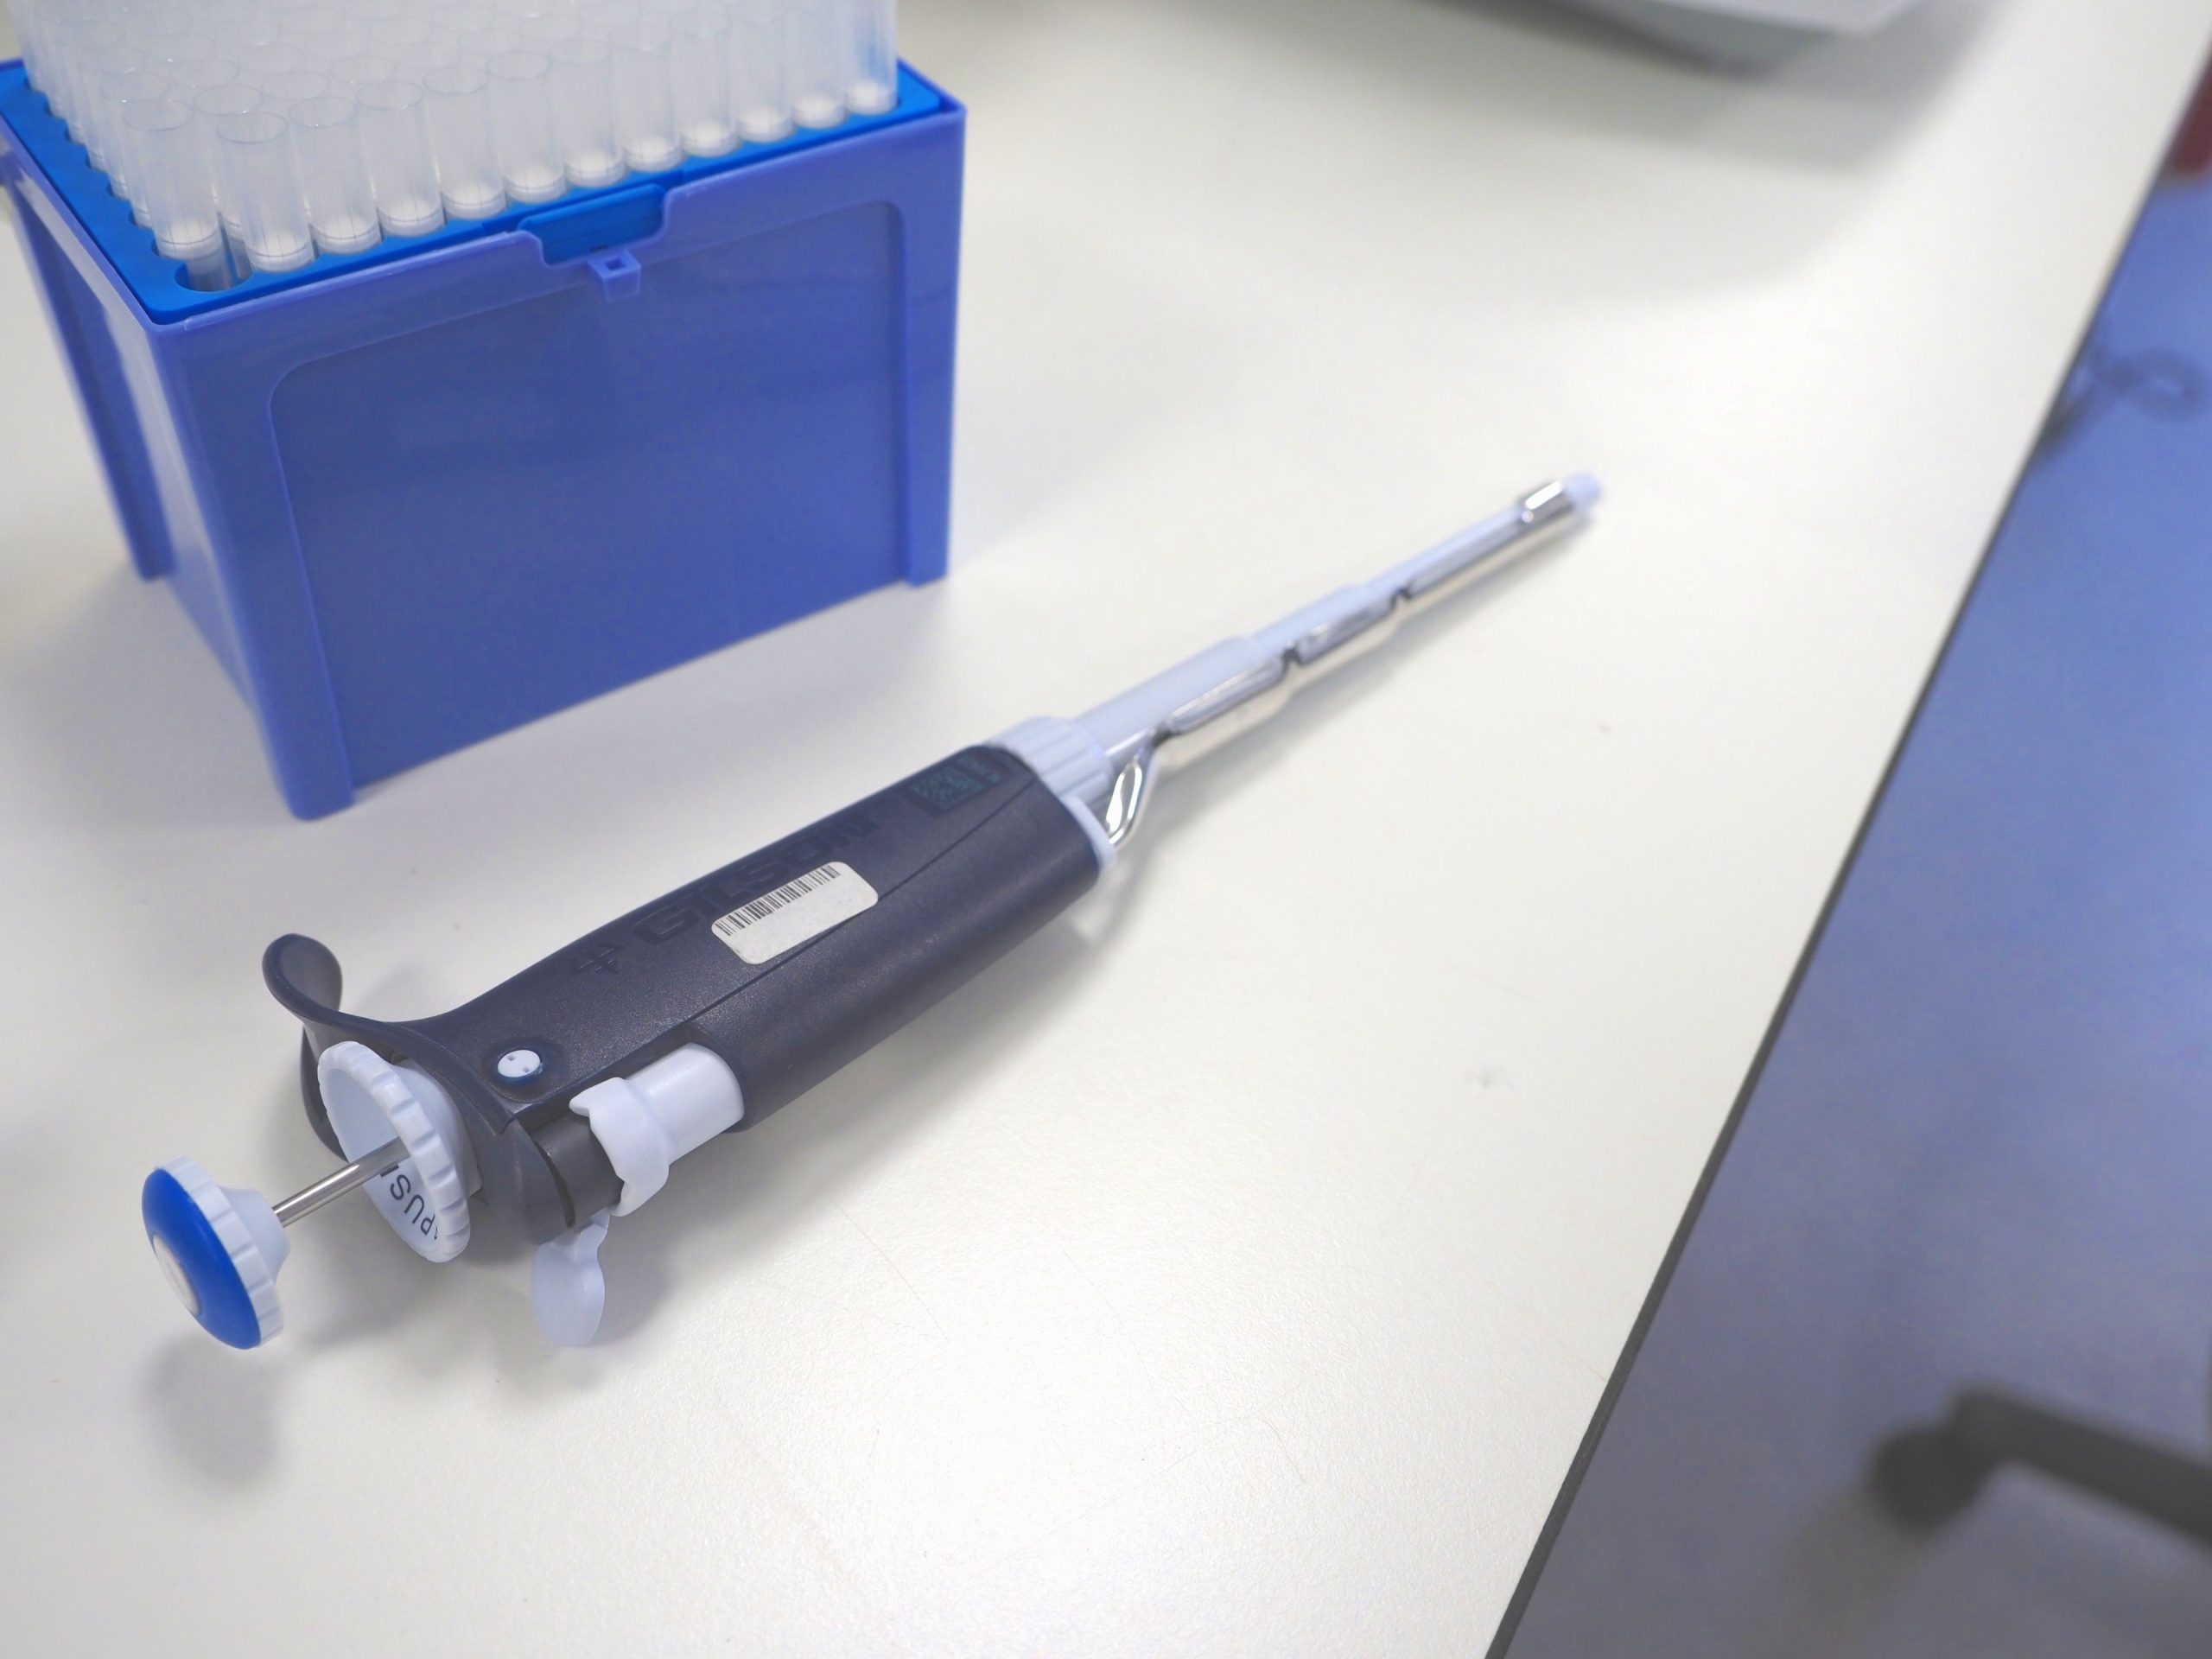 Bright blue open box of pipette tips in upper left corner with a dark blue and white pipette diagonally in front the box on a white lab bench counter.